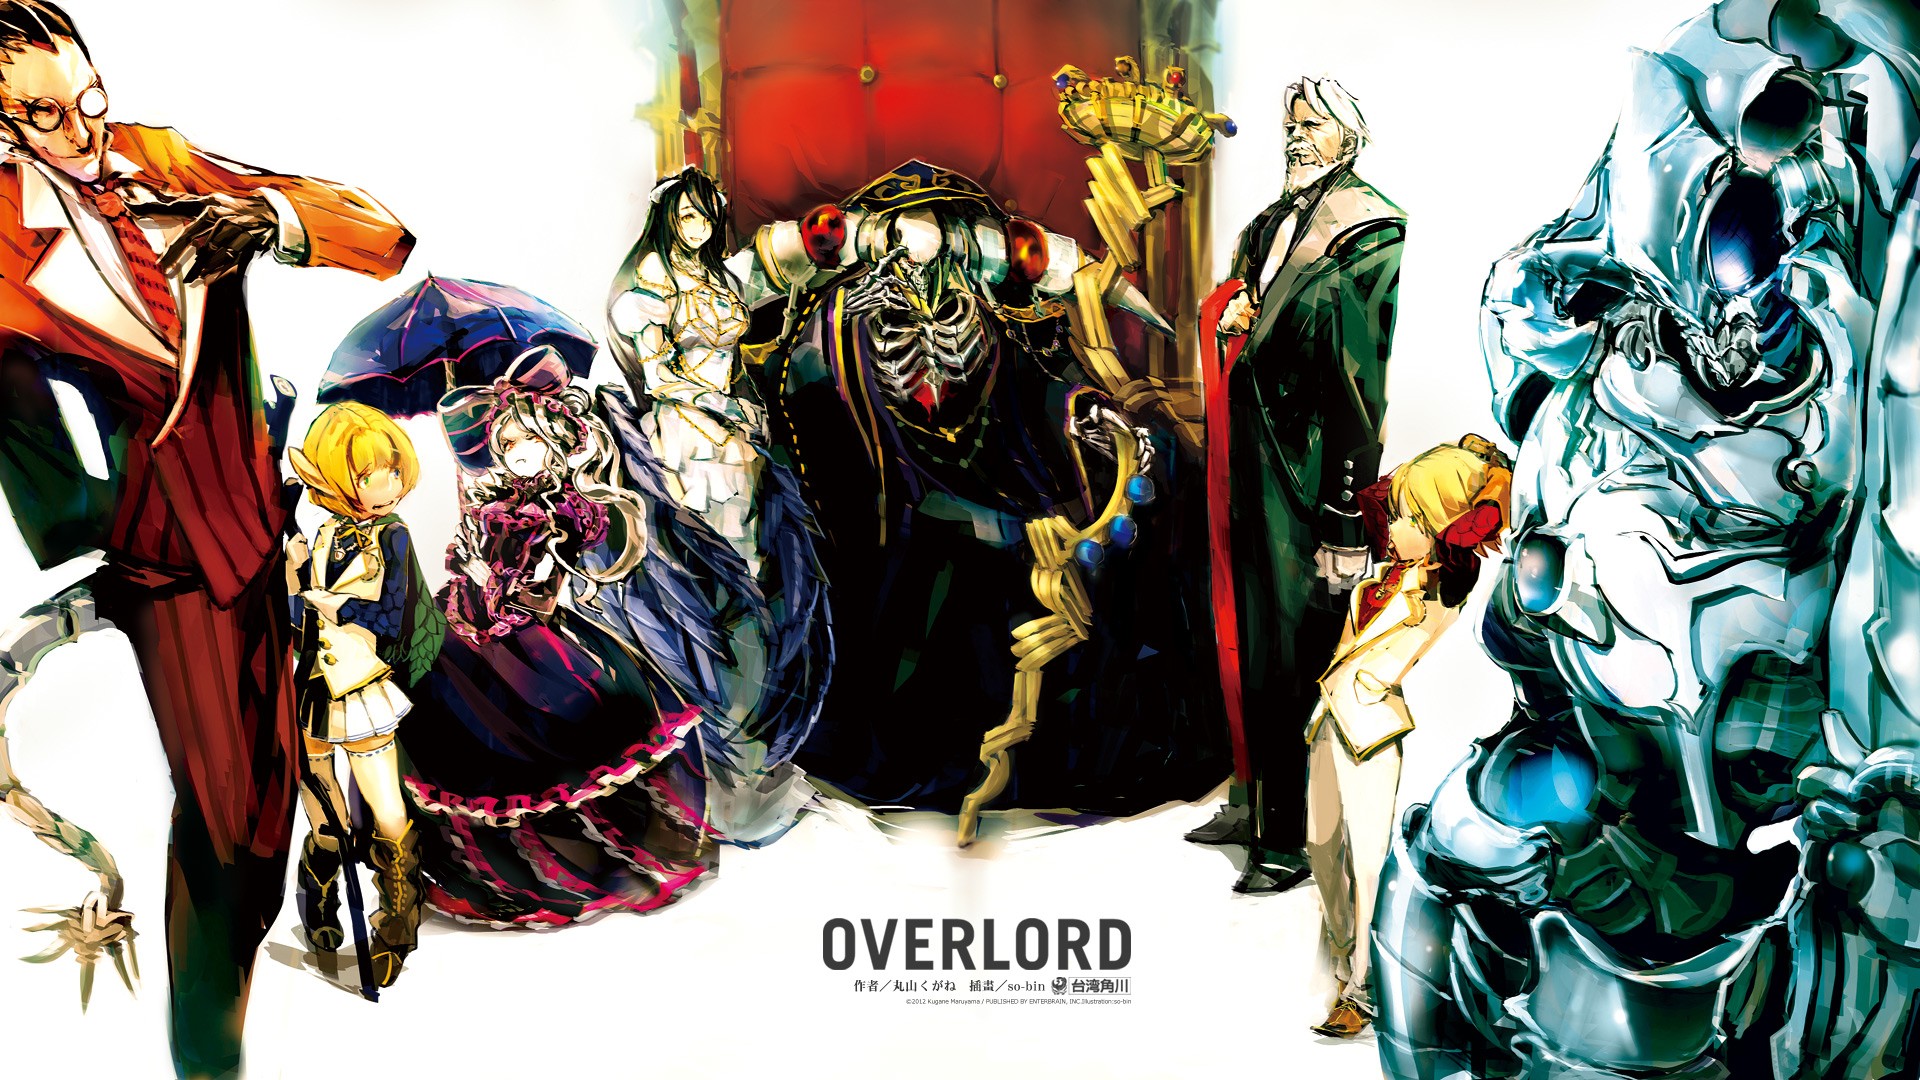 Overlord Anime Ainz Ooal Gown Albedo OverLord Demiurge Overlord Cocytus Overlord Aura Bella Fiora Ov 1920x1080